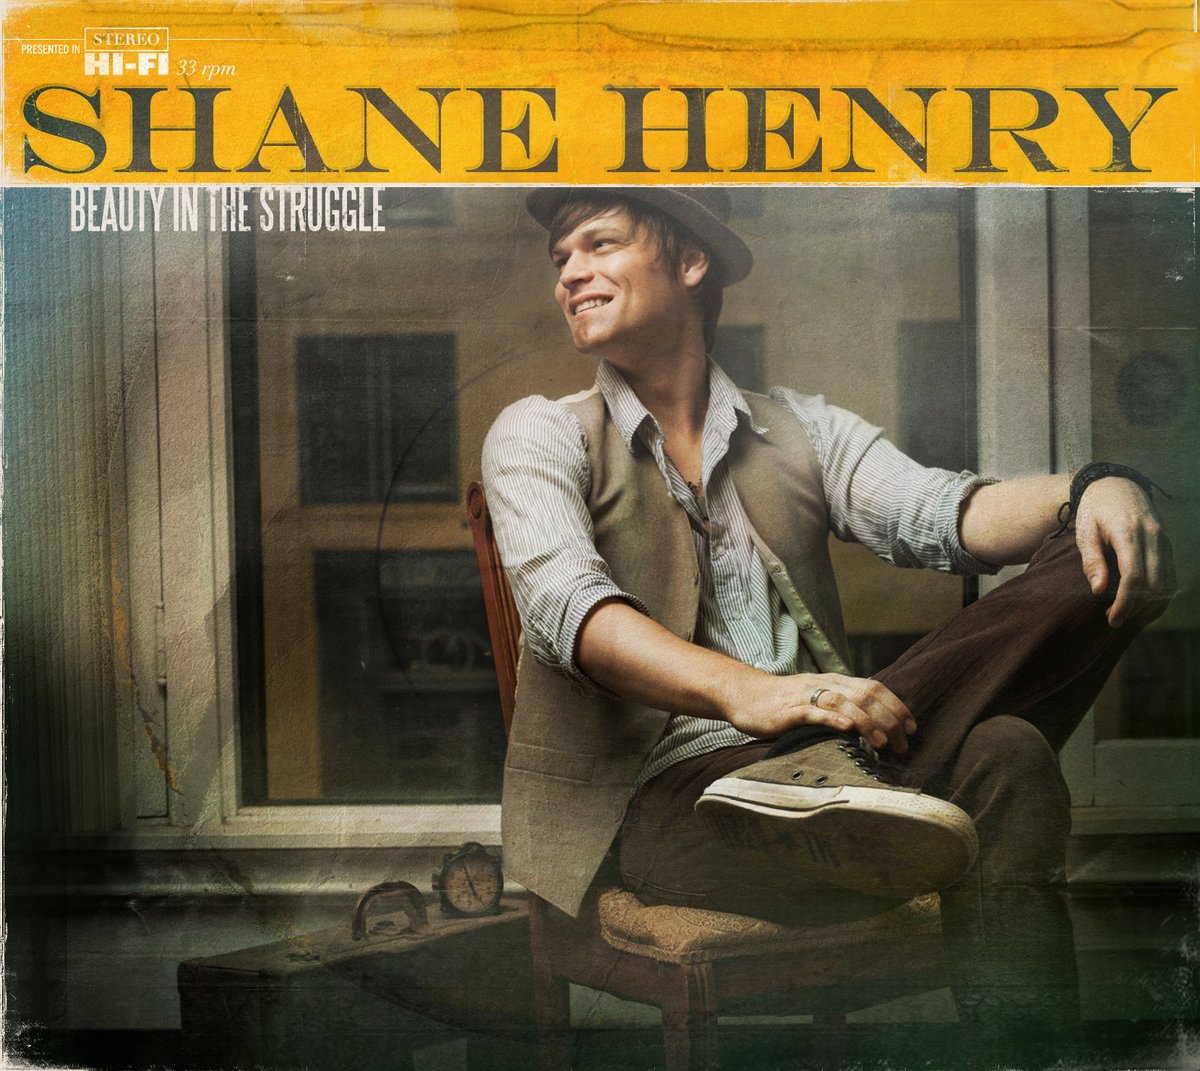 Image of Shane Henry "Beauty in the Struggle" CD 